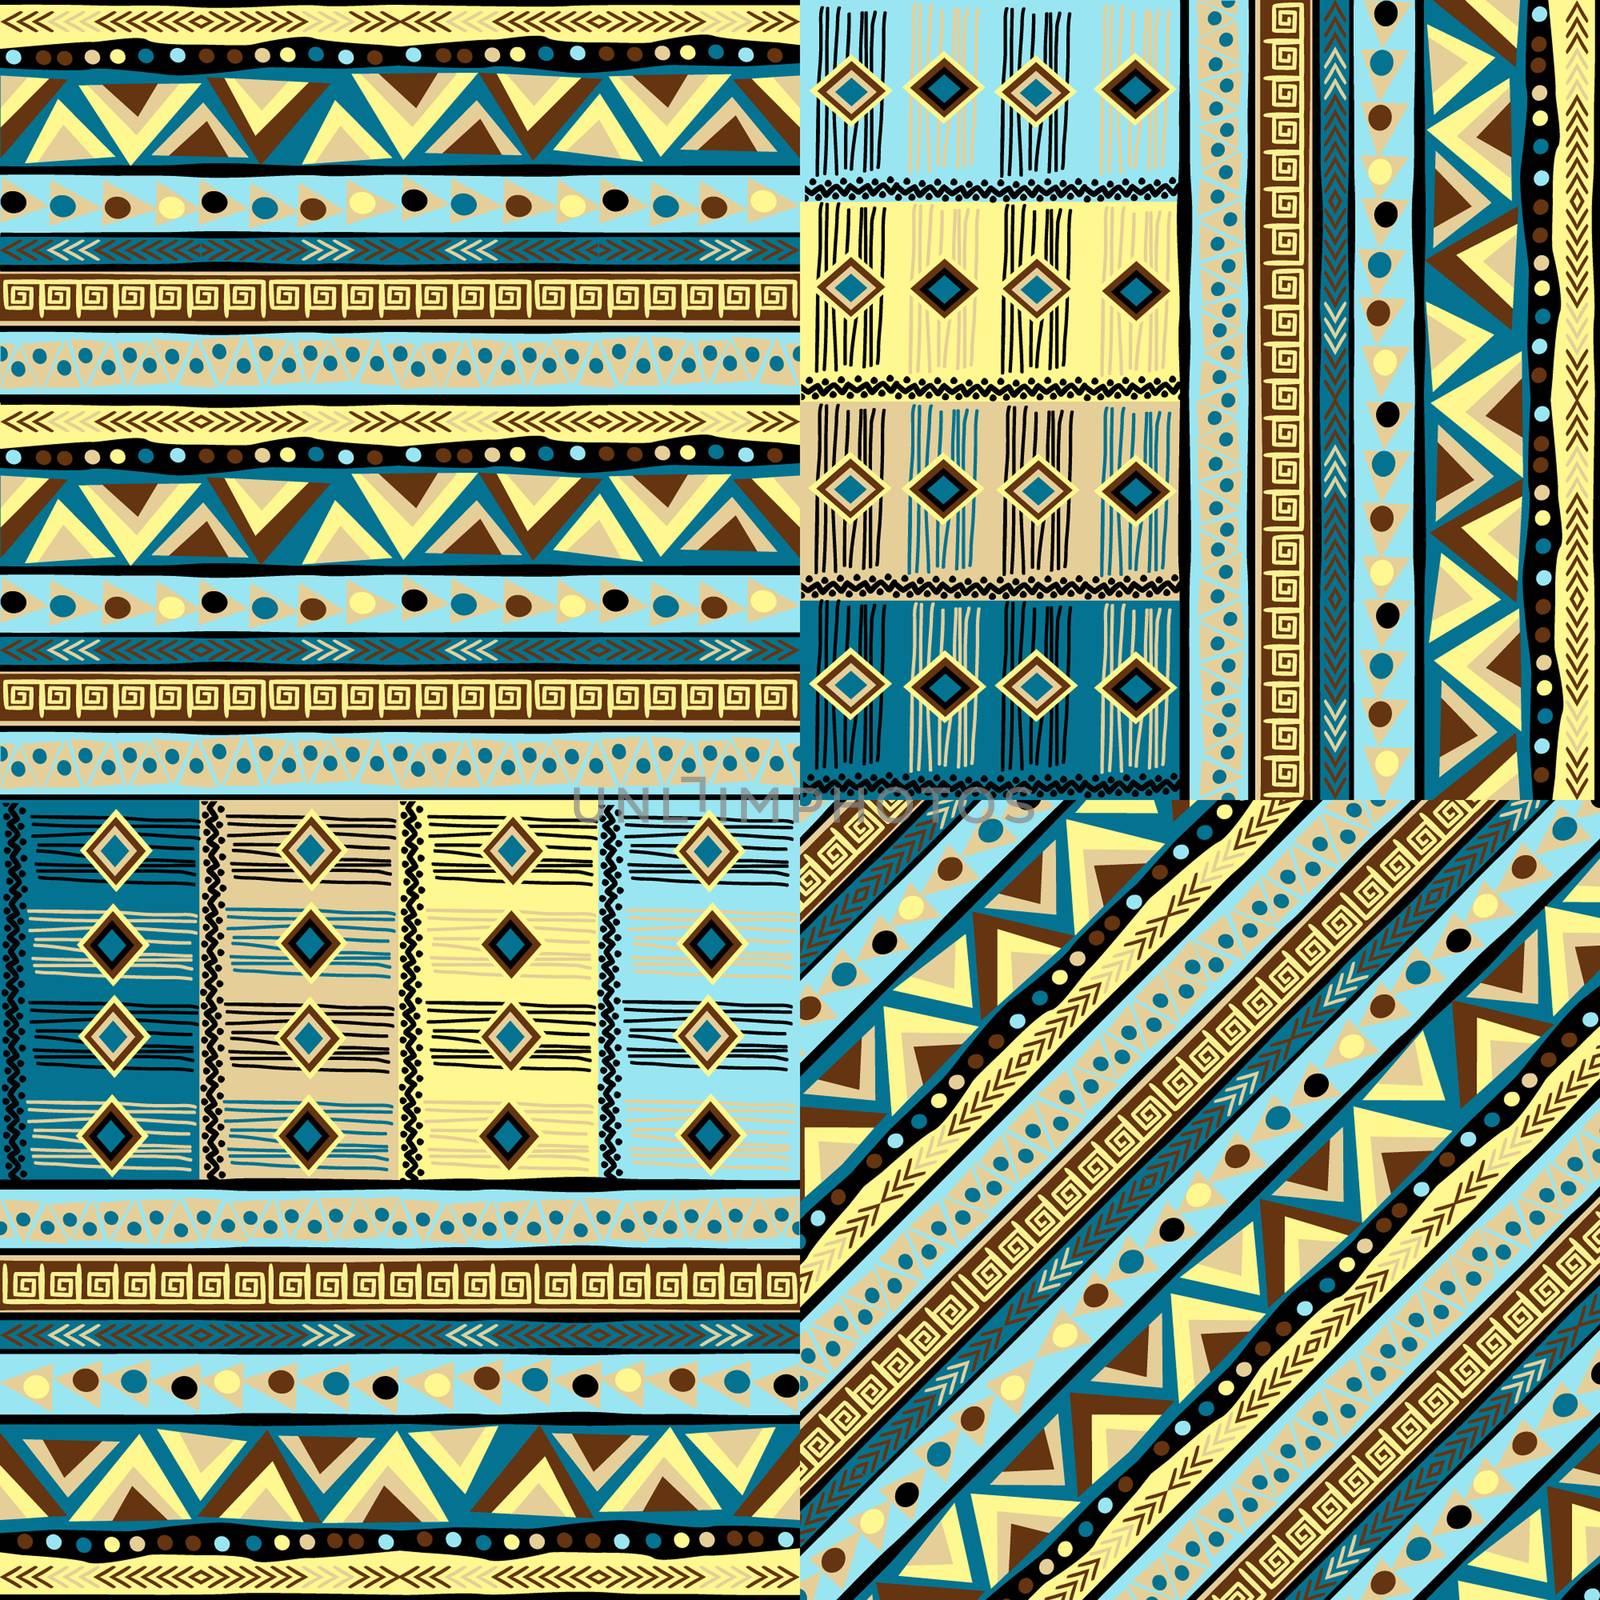 Decorative backgrounds collection with geometric motifs by hibrida13